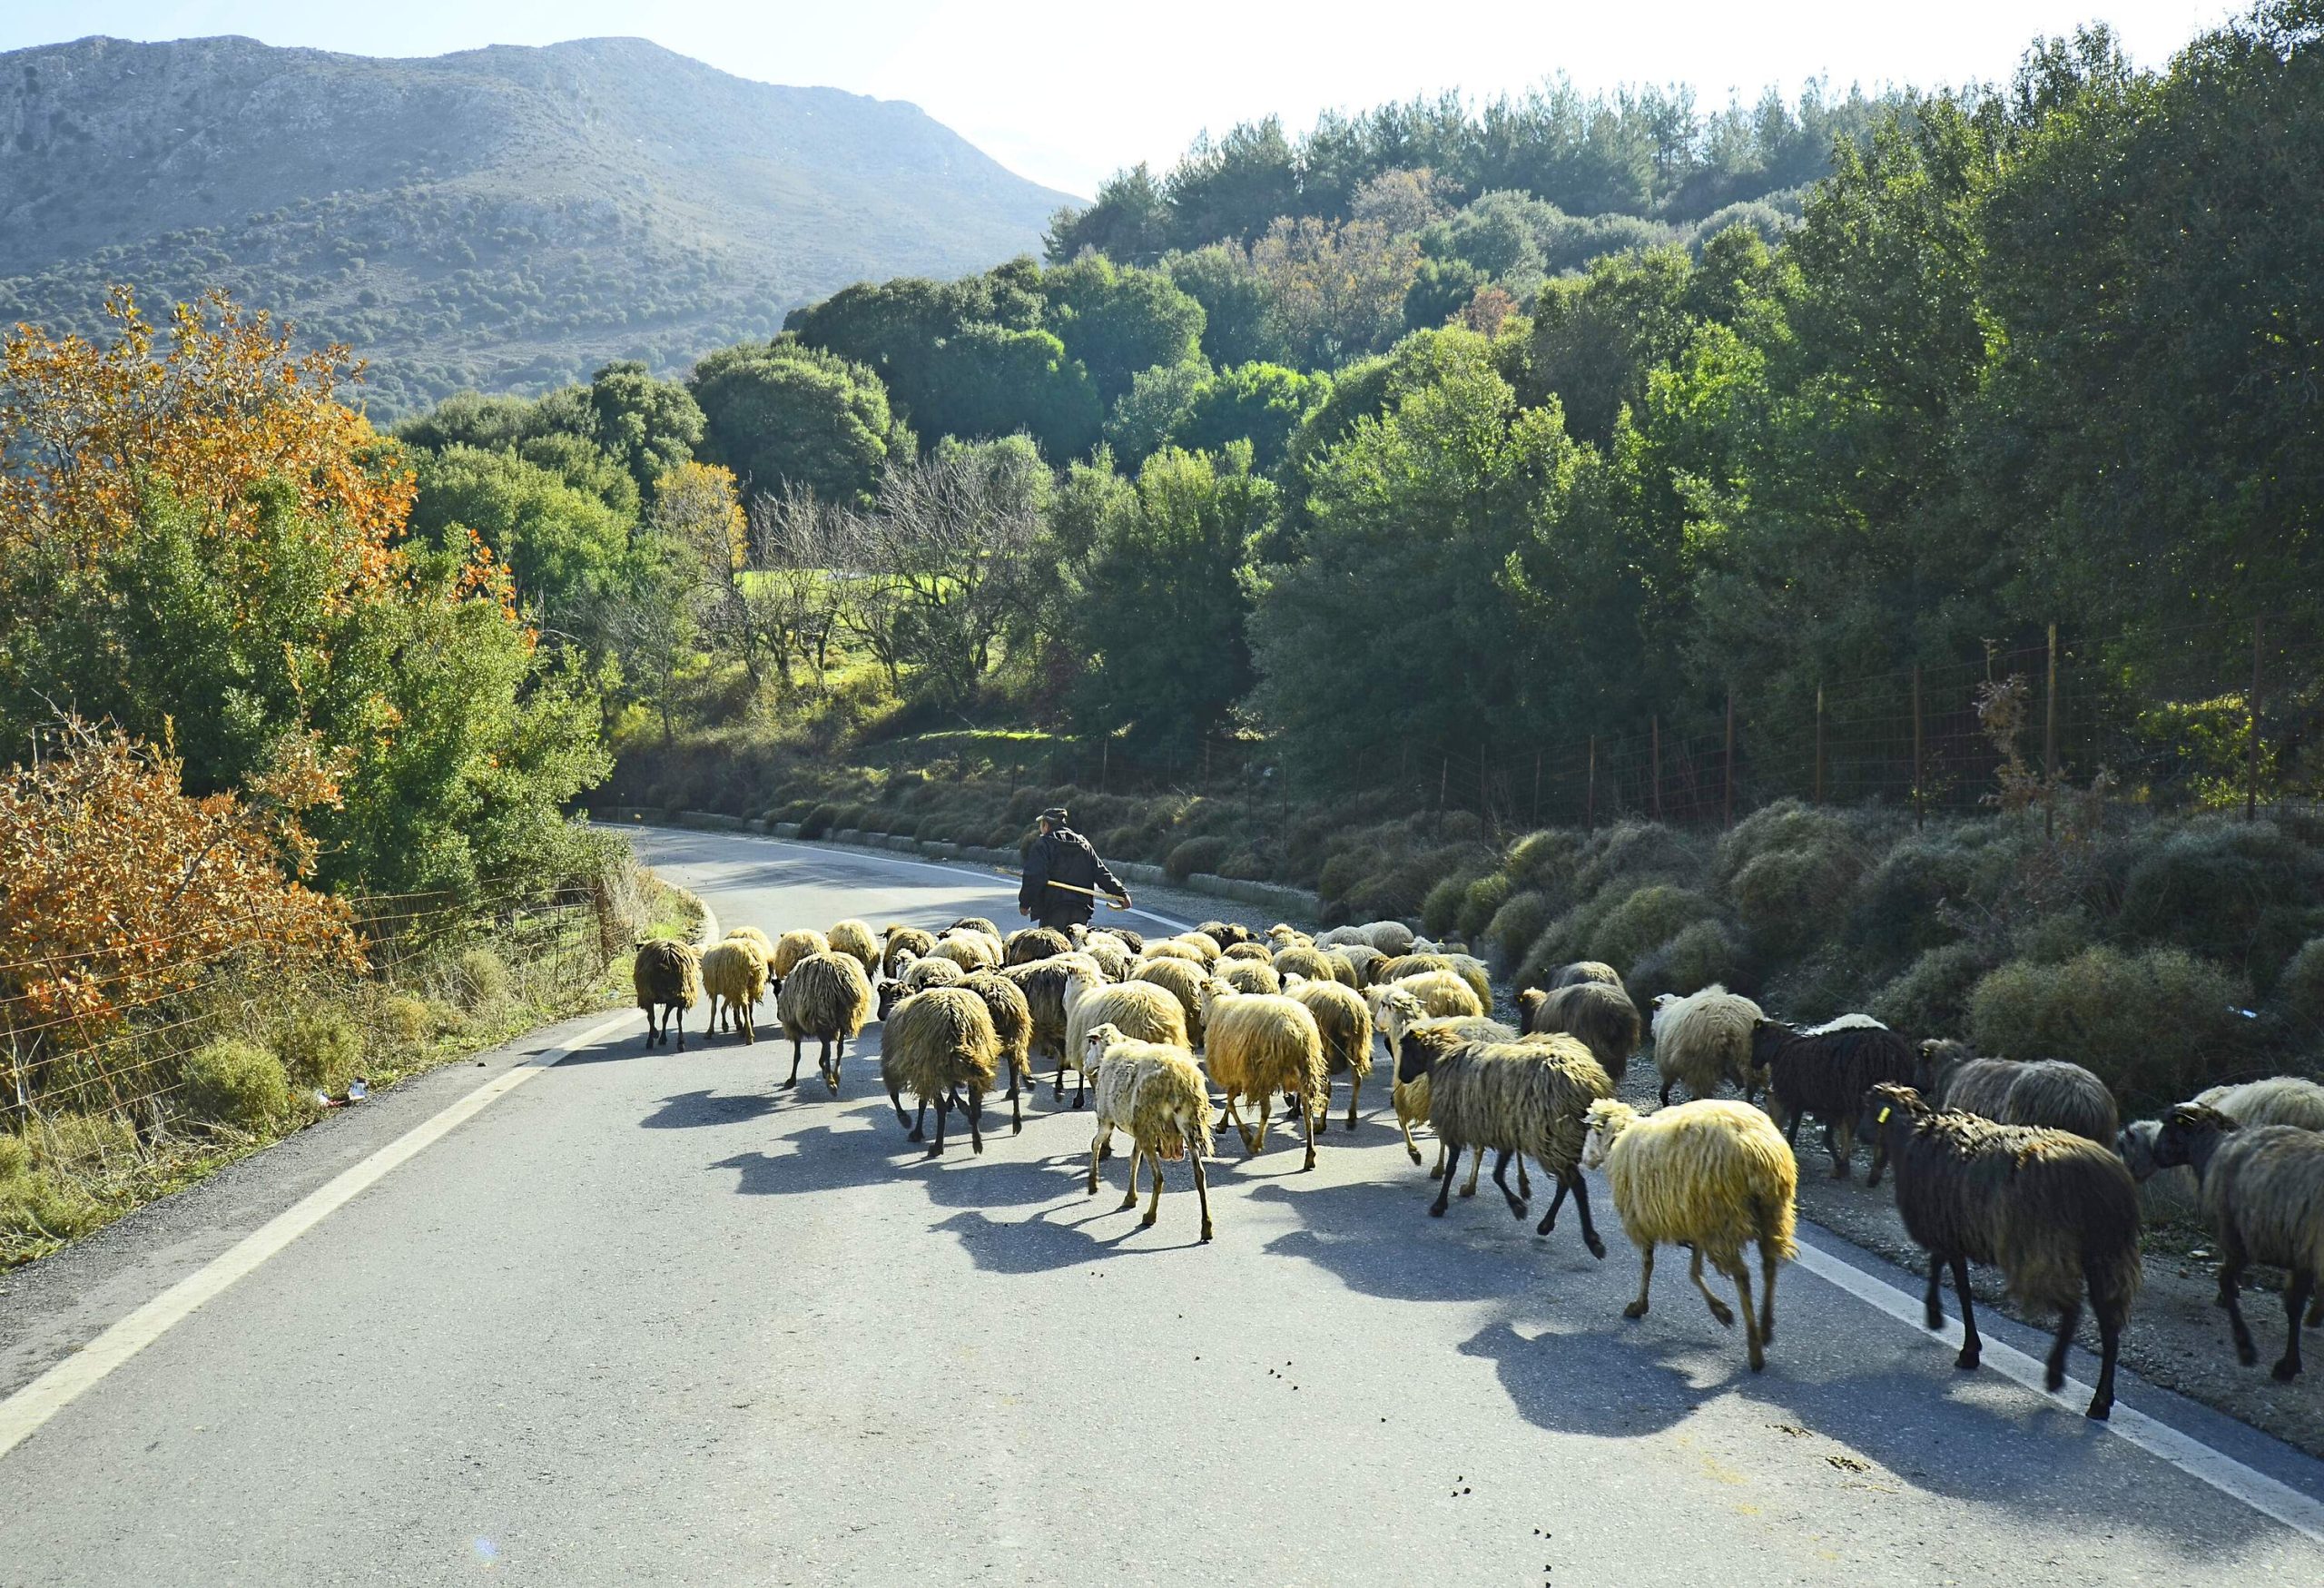 A man leads a flock of sheep walking on a road in a lush forested mountain.